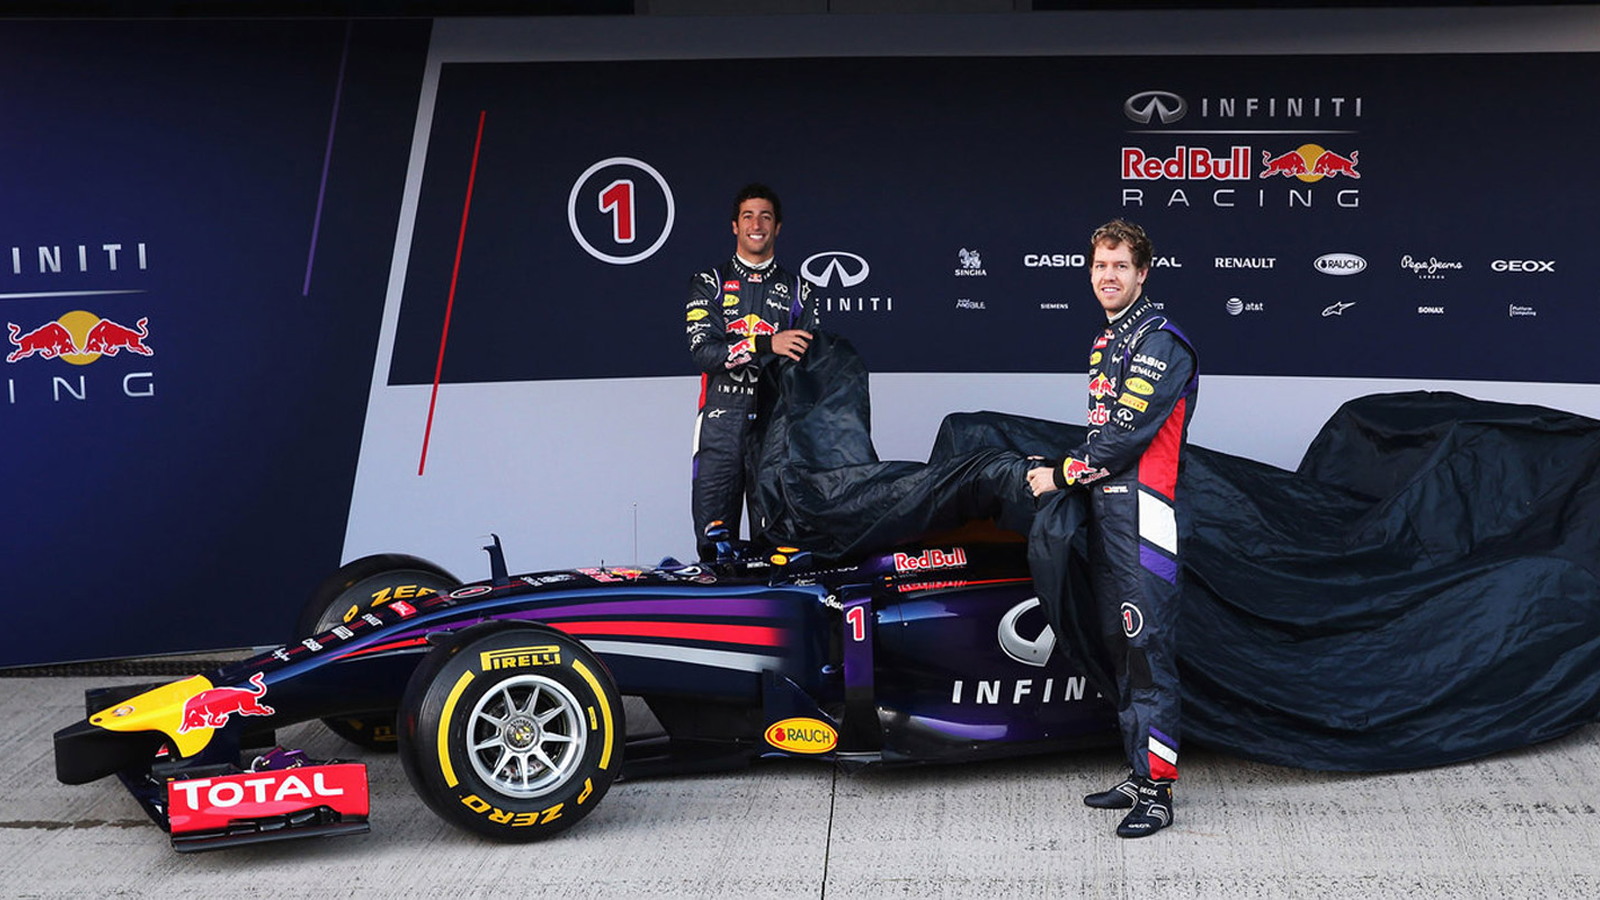 Red Bull Racing’s RB10 2014 Formula One car